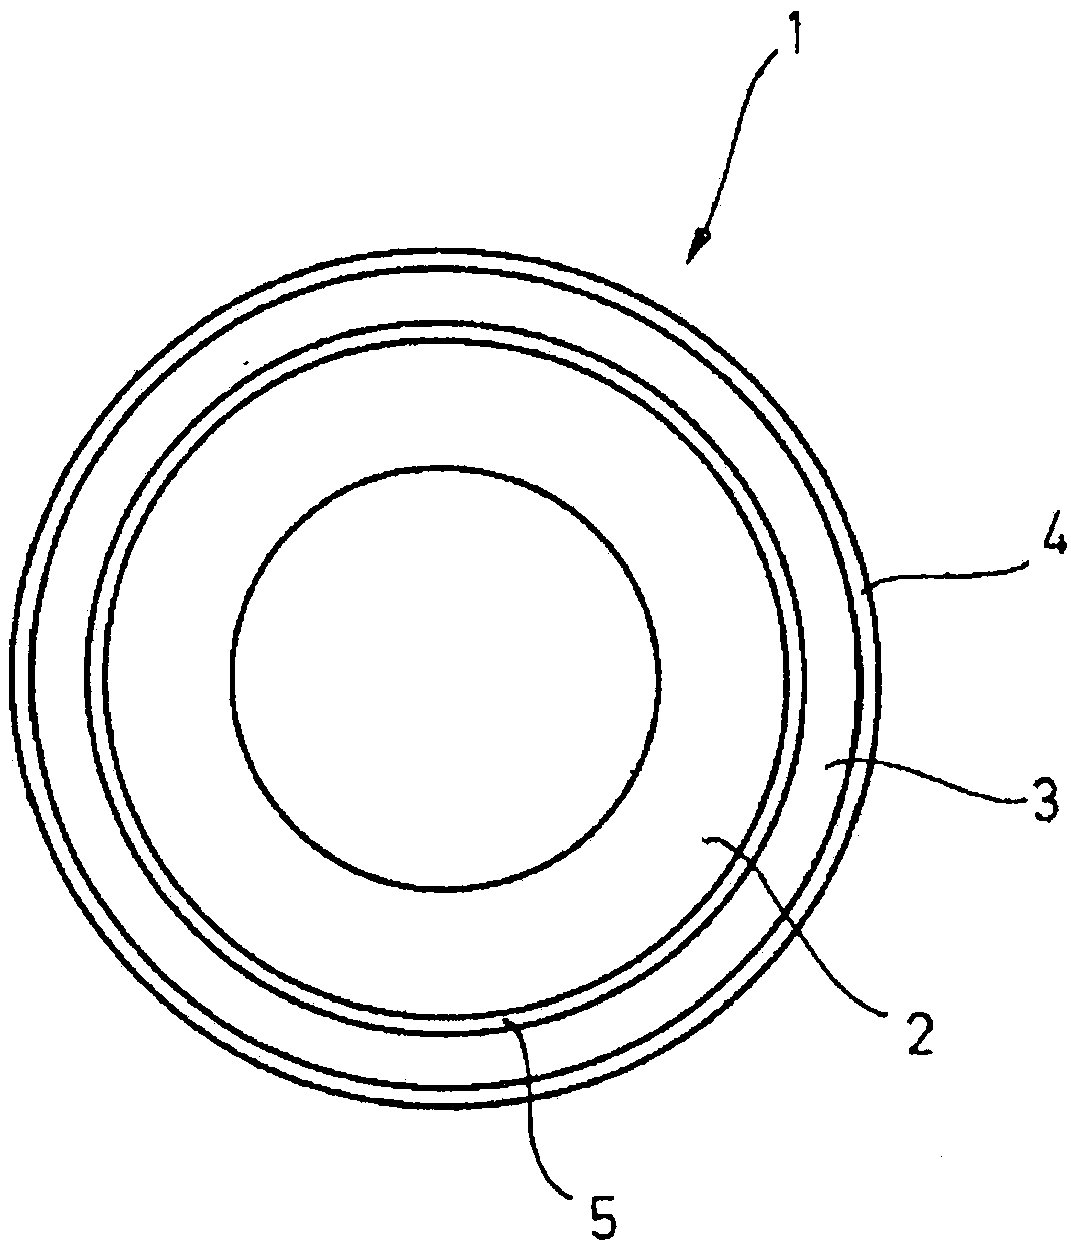 A multi-layered pipe and a method for forming a multi-layered pipe